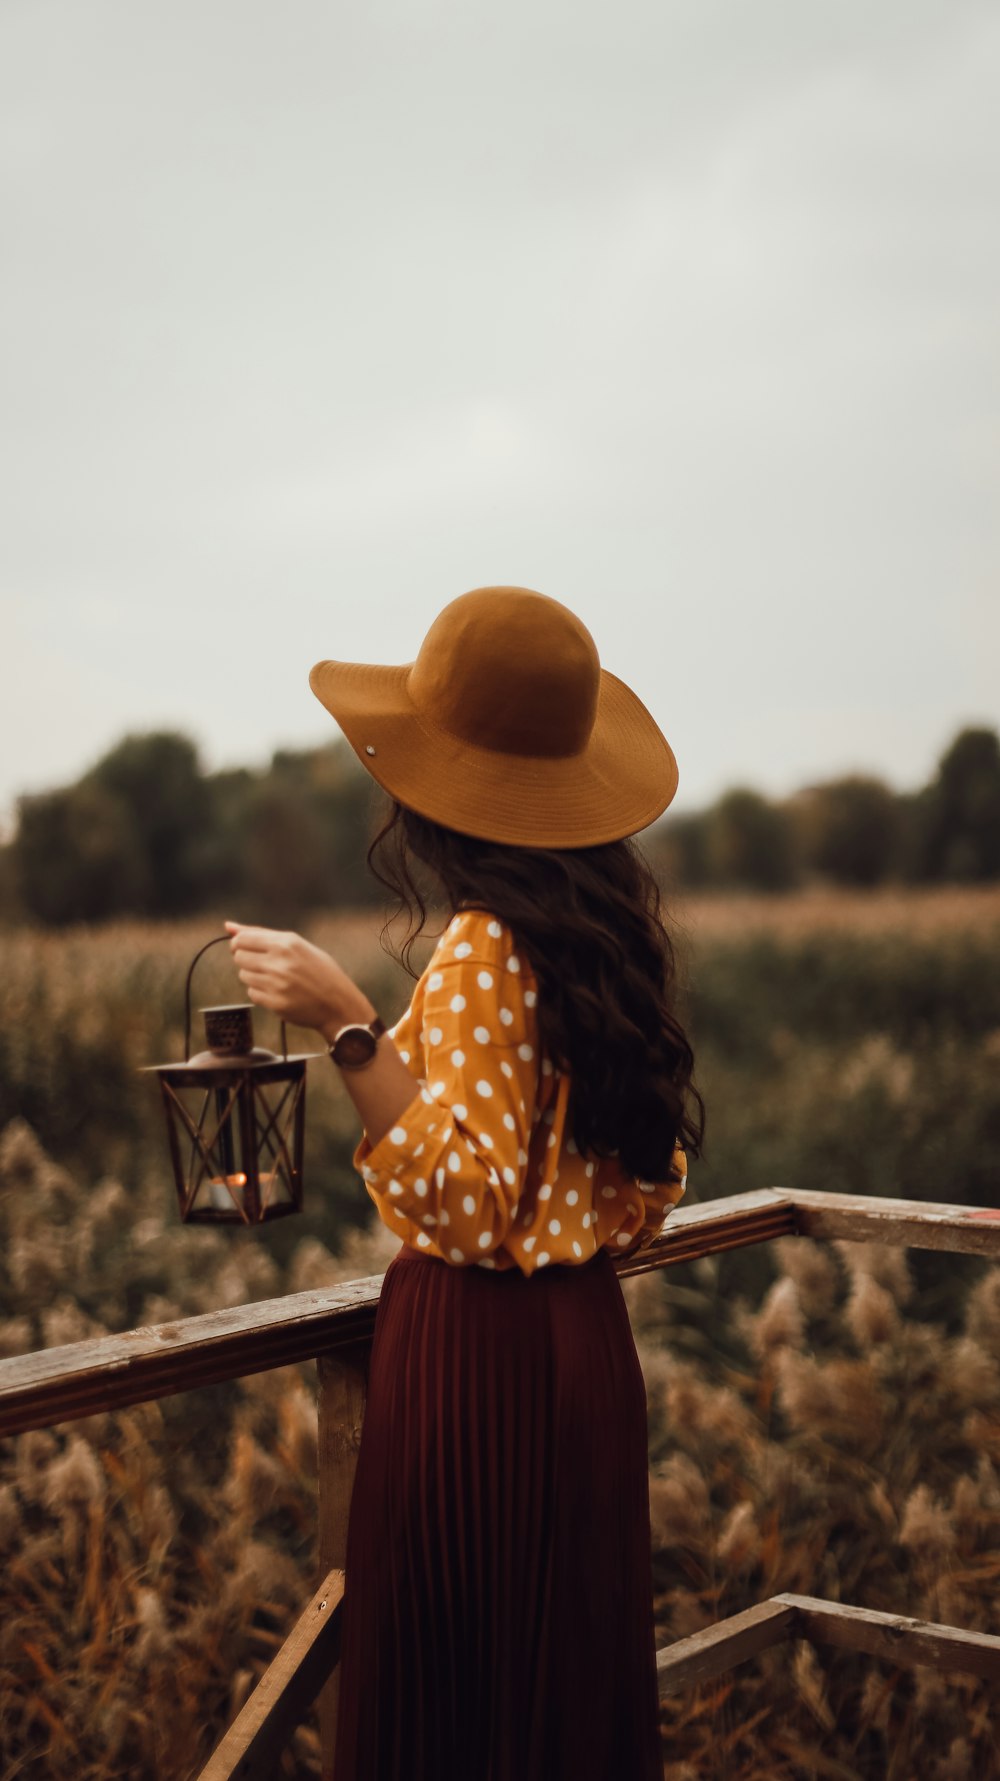 woman in brown sun hat and black and white polka dot dress holding brown wooden fence